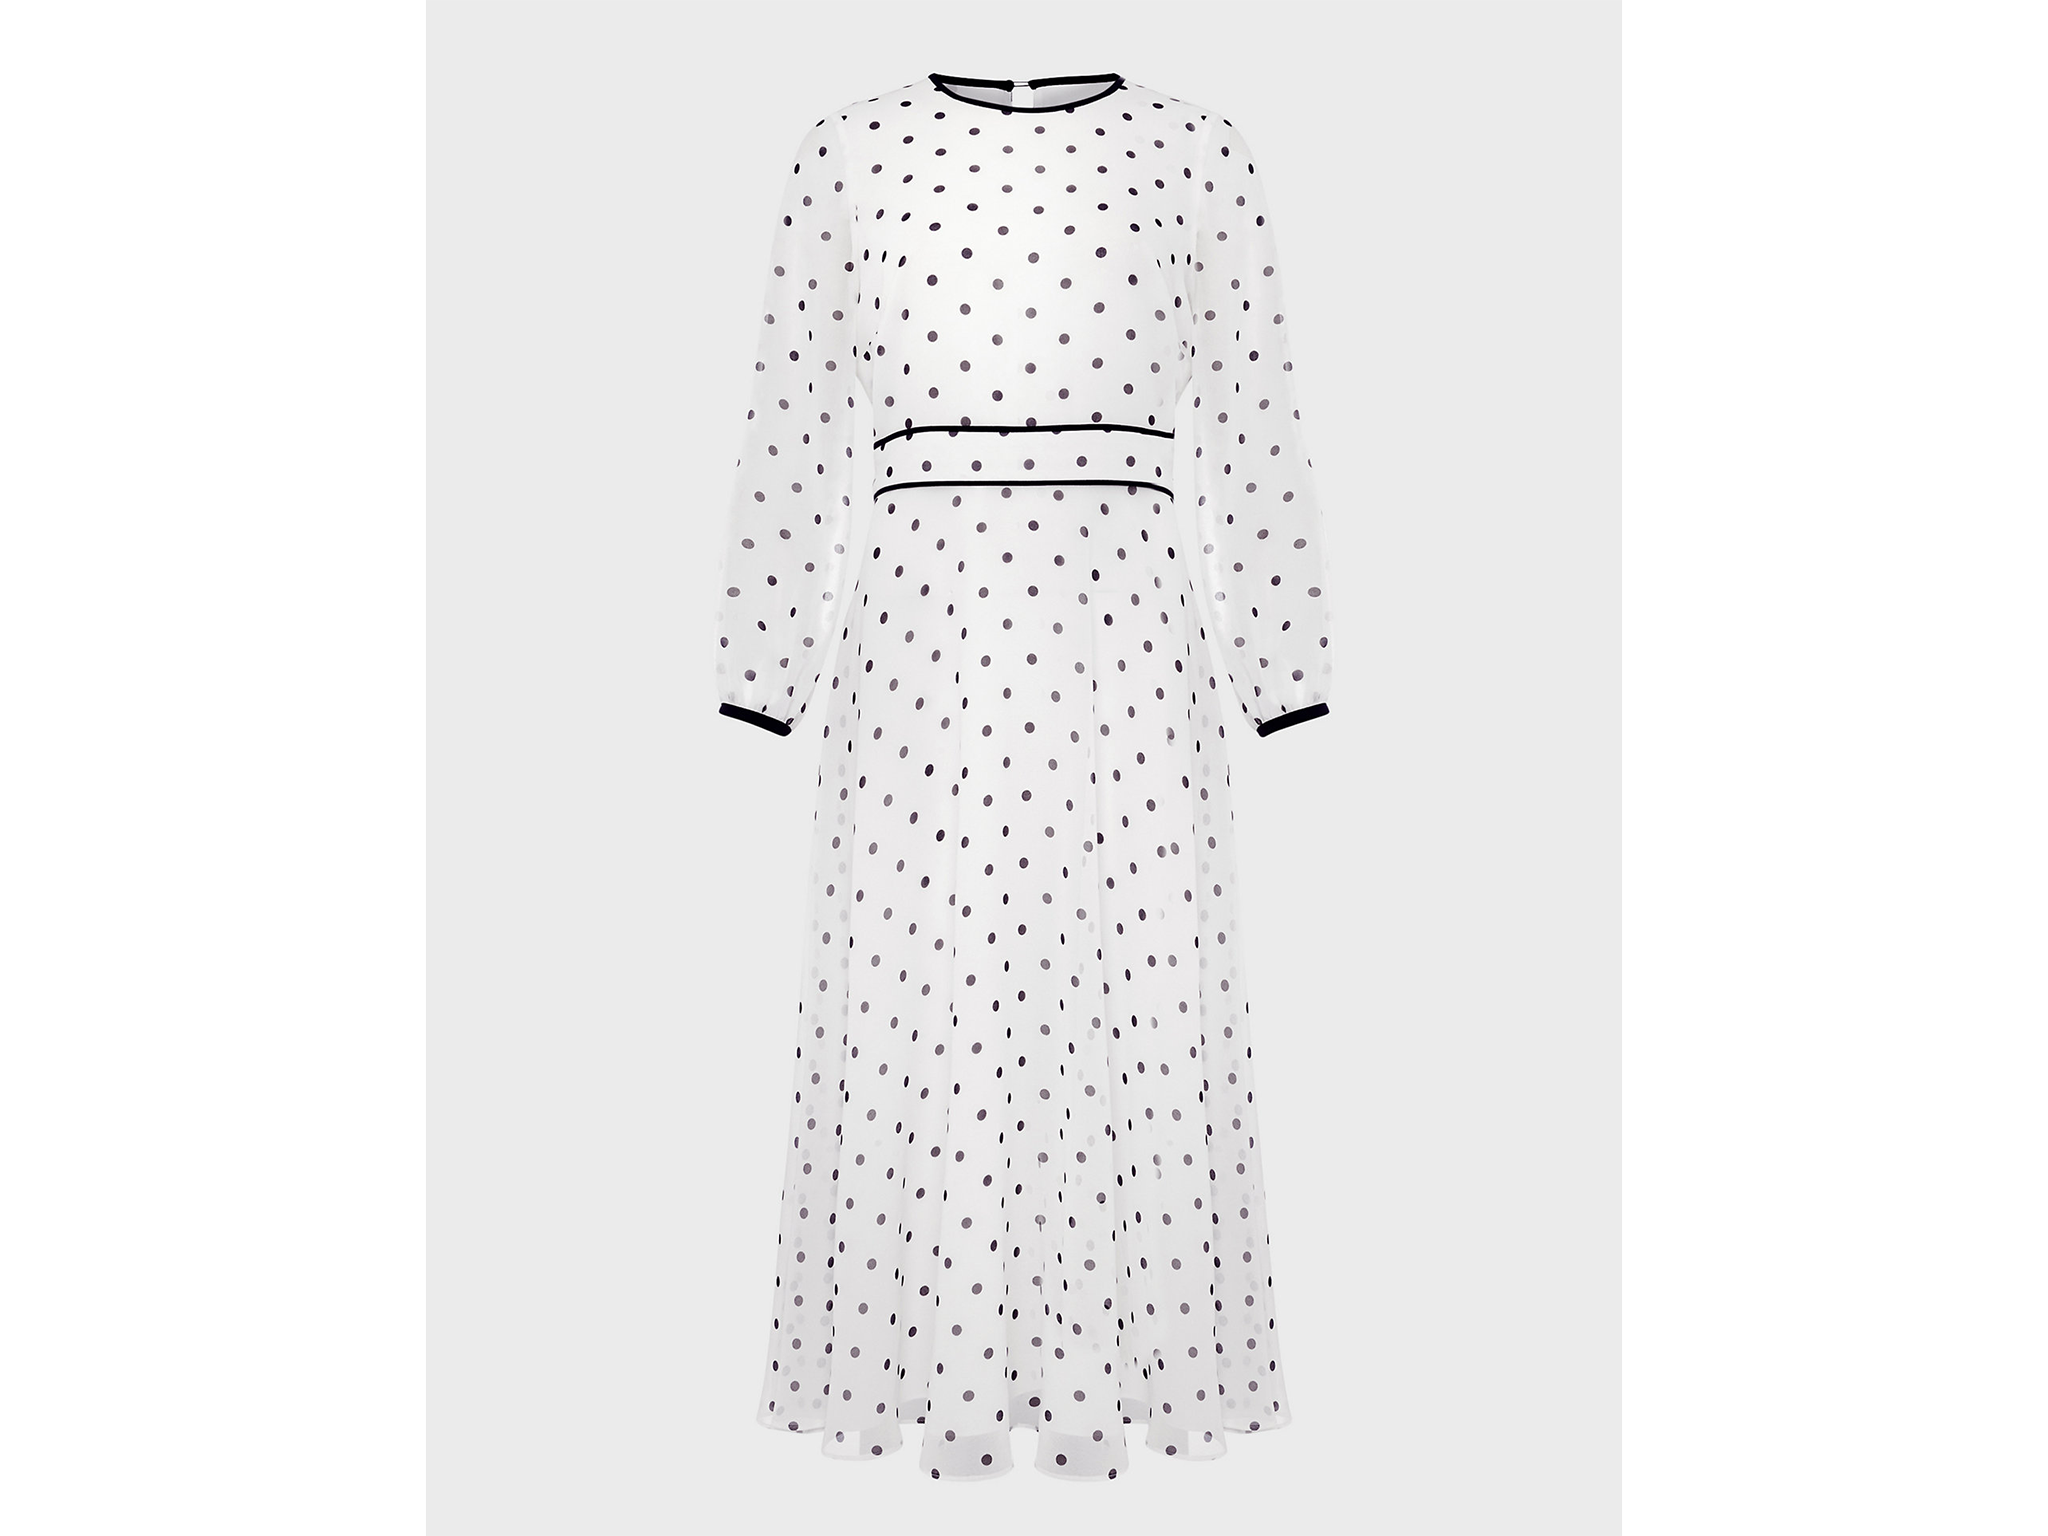 Kate Middleton's dress today at Ascot: Dupes for the Alessandra Rich polka  dot midi